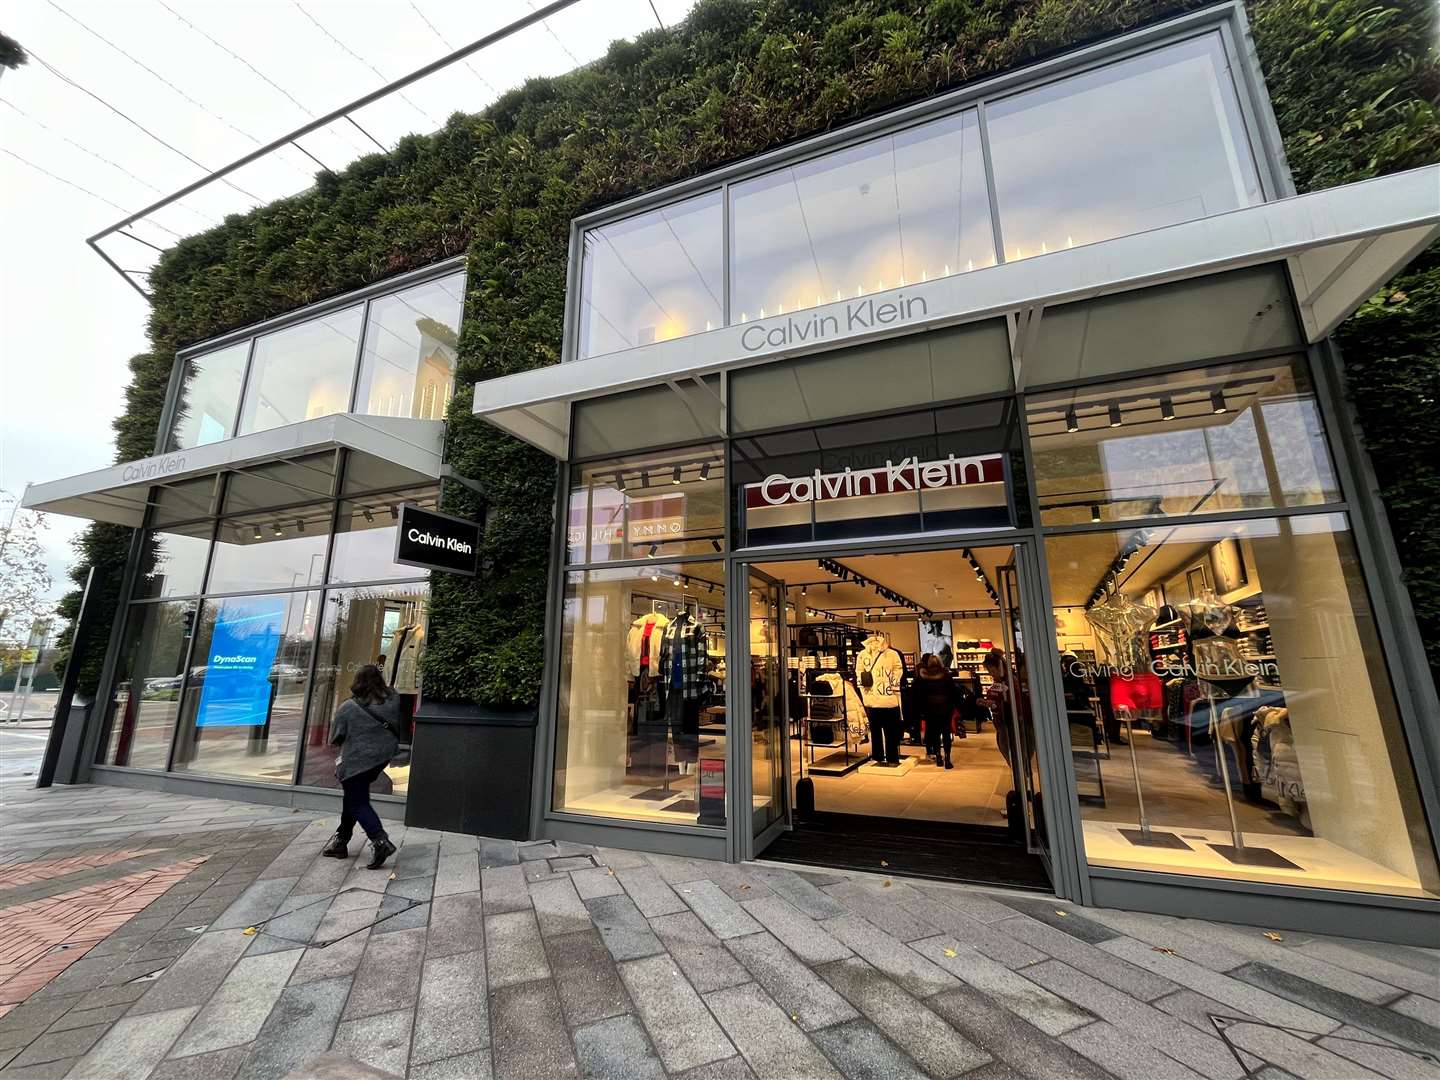 Calvin Klein has opened in a bigger unit at the popular shopping centre